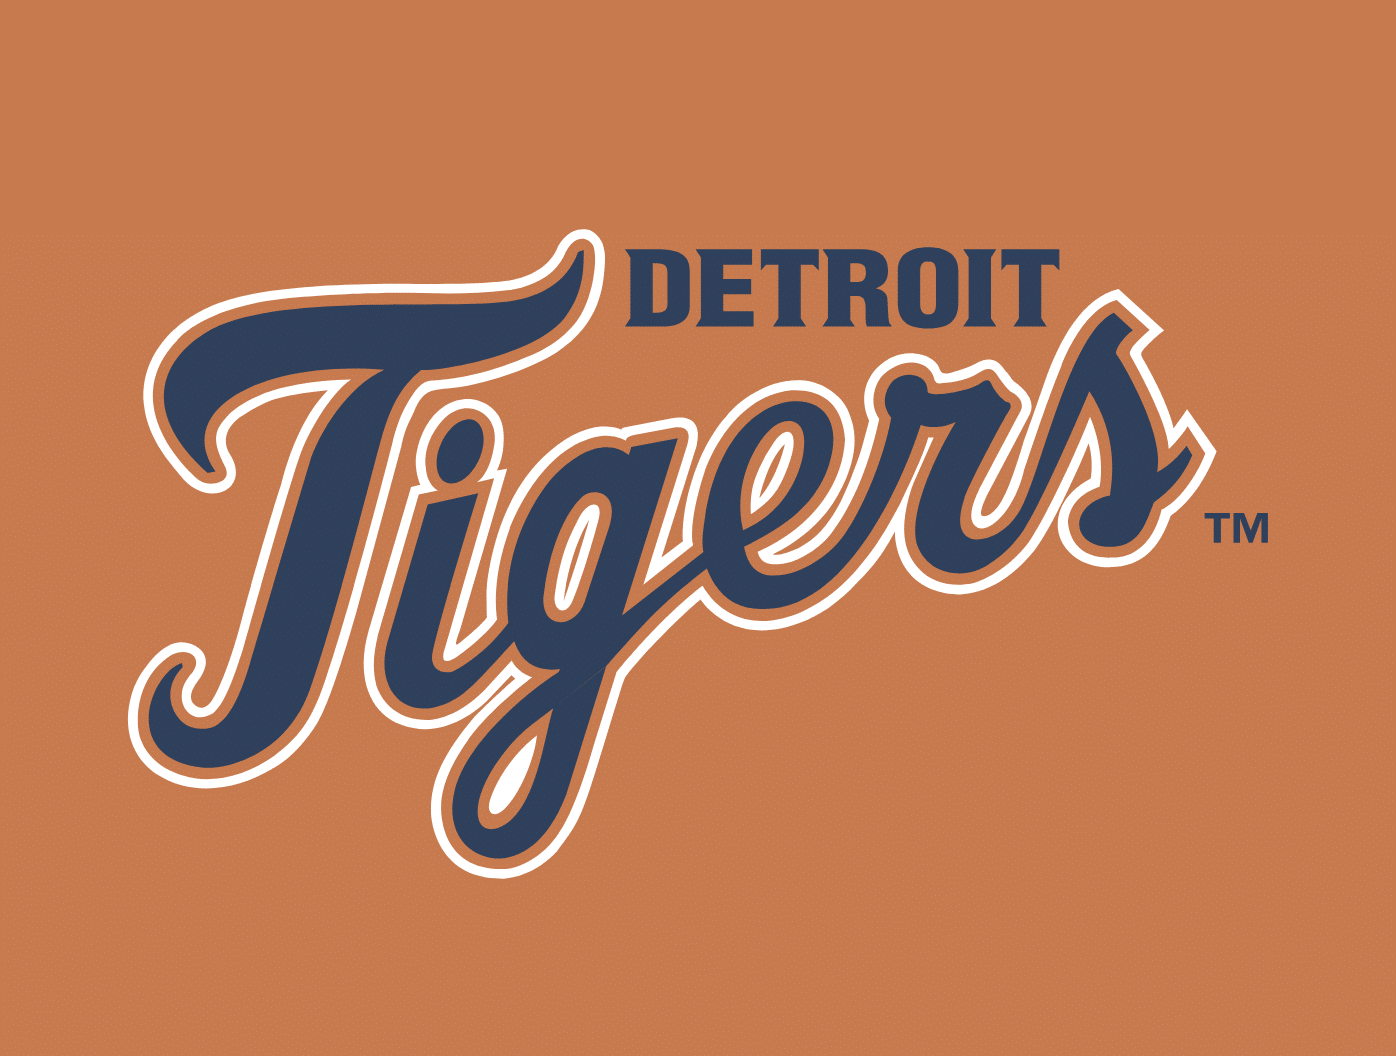 Detroit Tigers announce coaching changes Matthew Boyd and Cisnero to become free agents Detroit Tigers announce flurry of roster moves